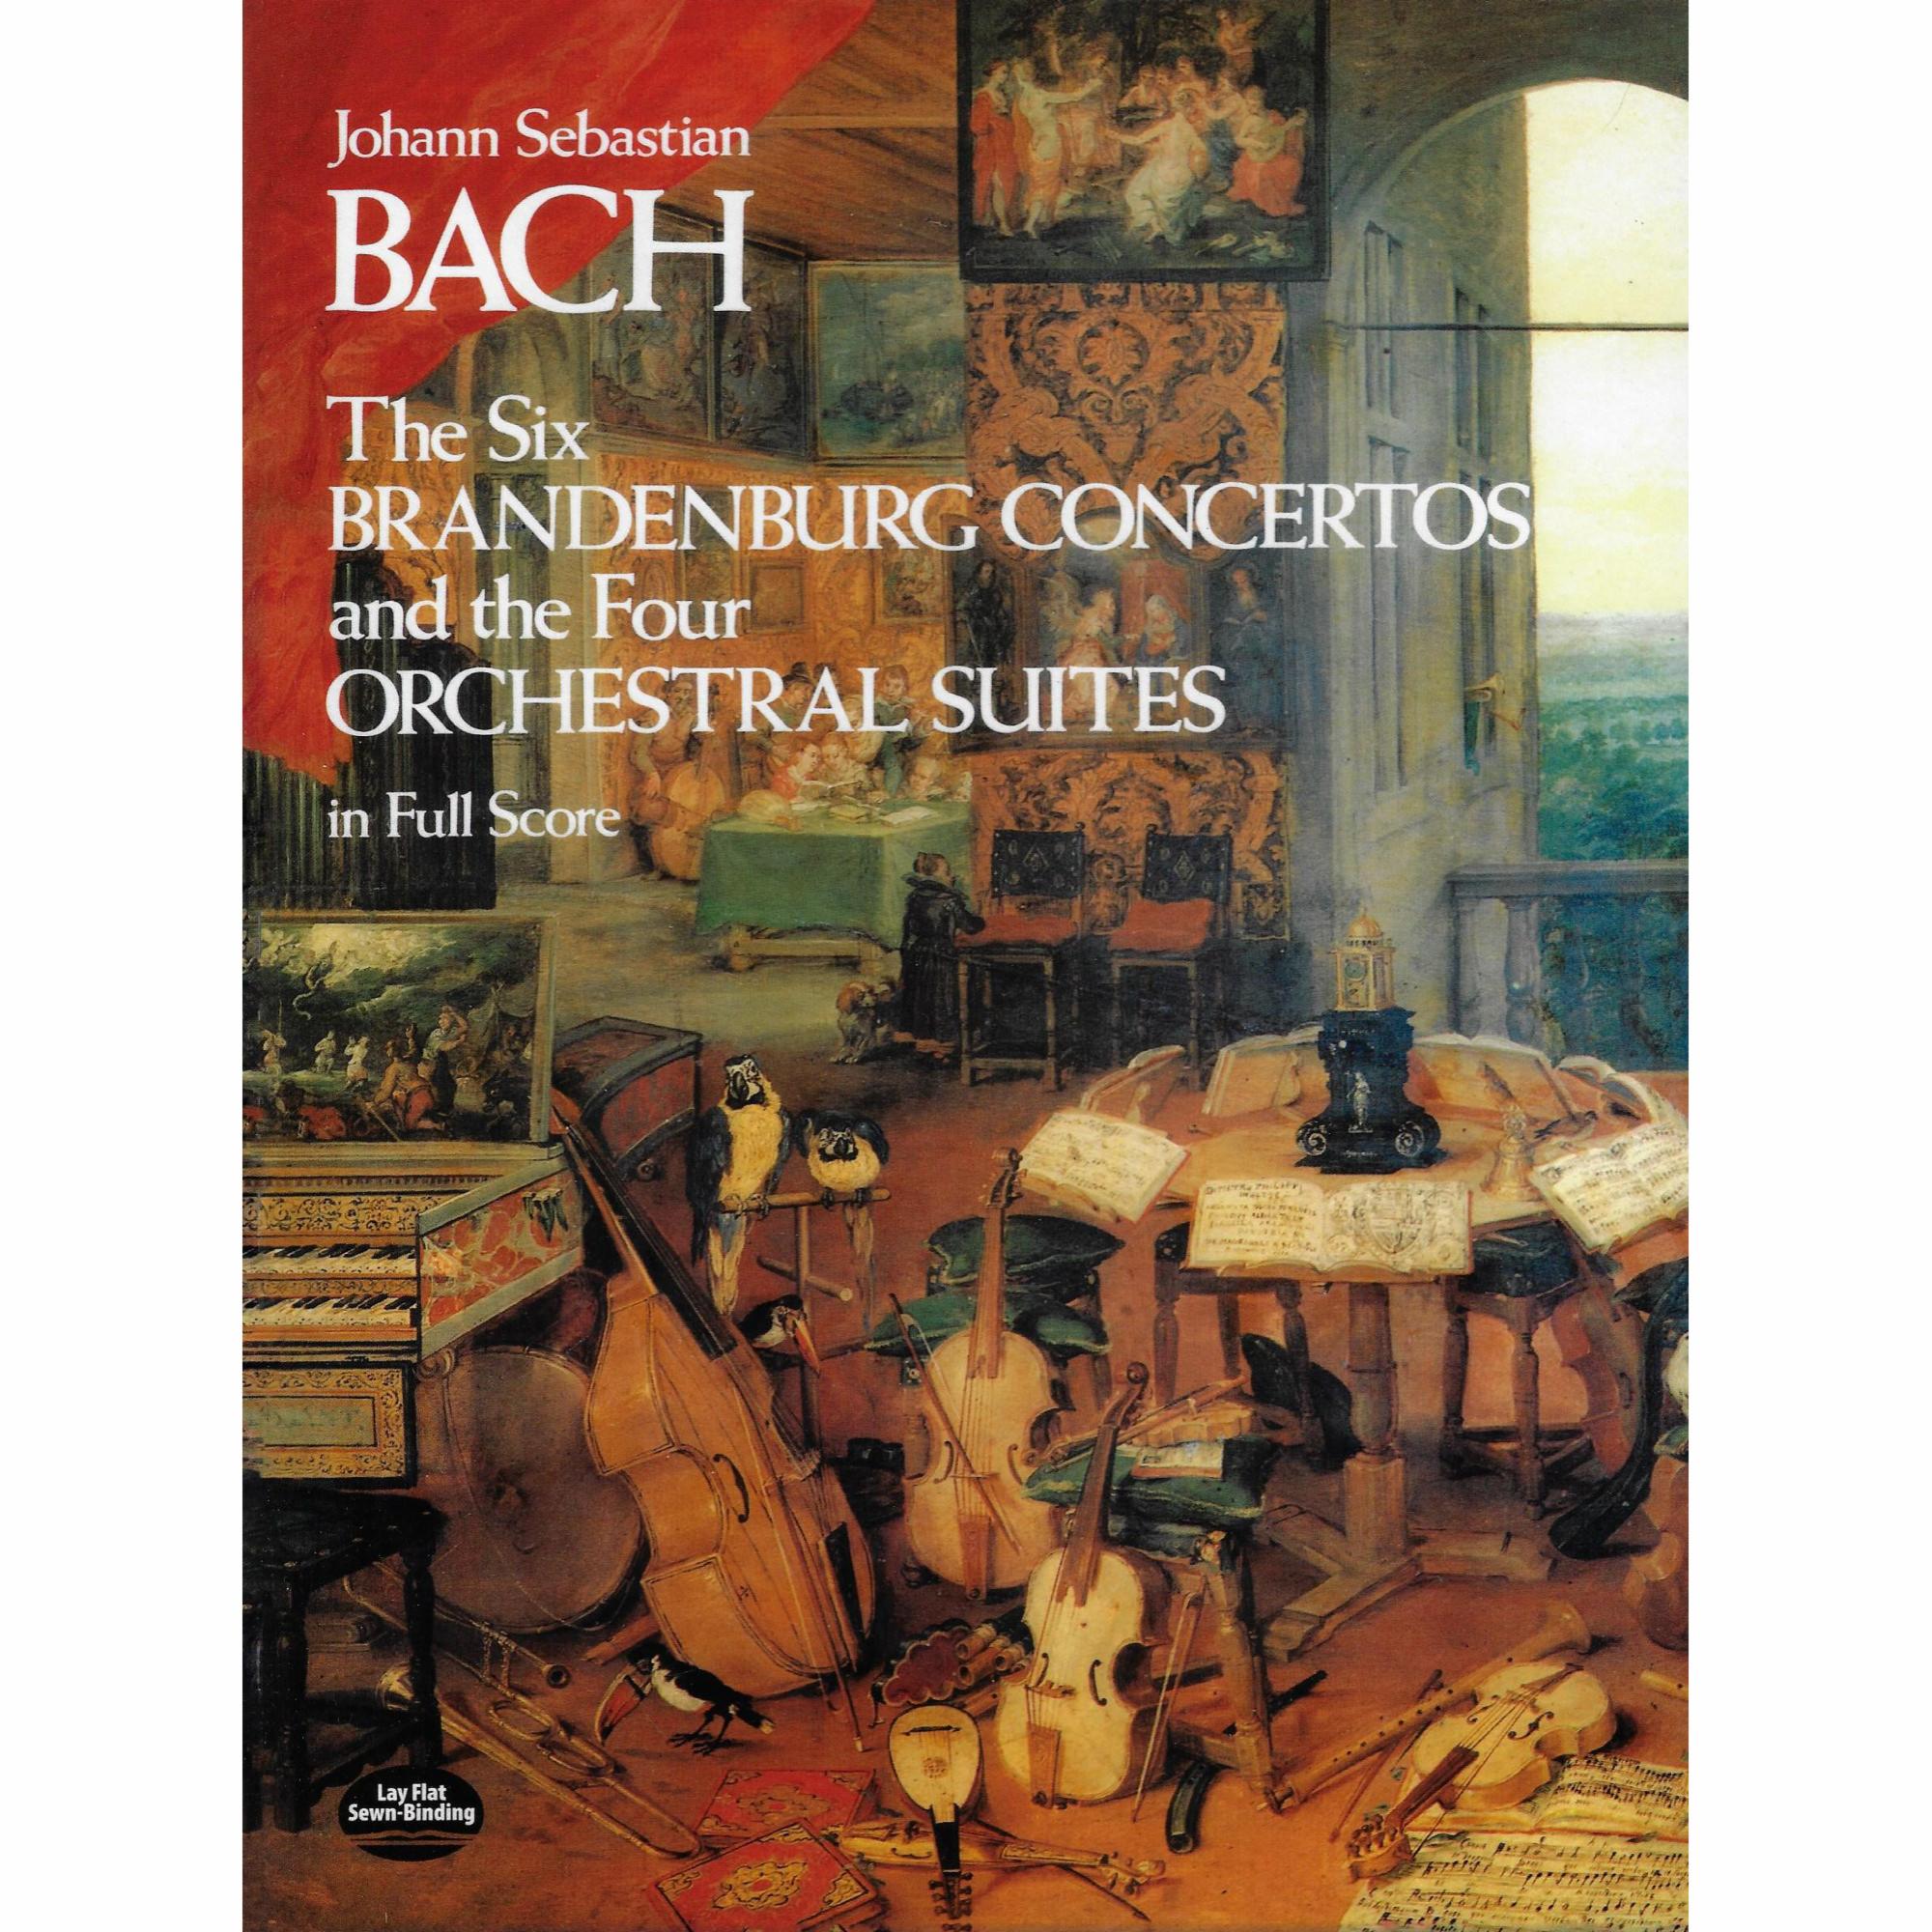 Bach -- The Six Brandenburg Concertos and the Four Orchestral Suites in Full Score